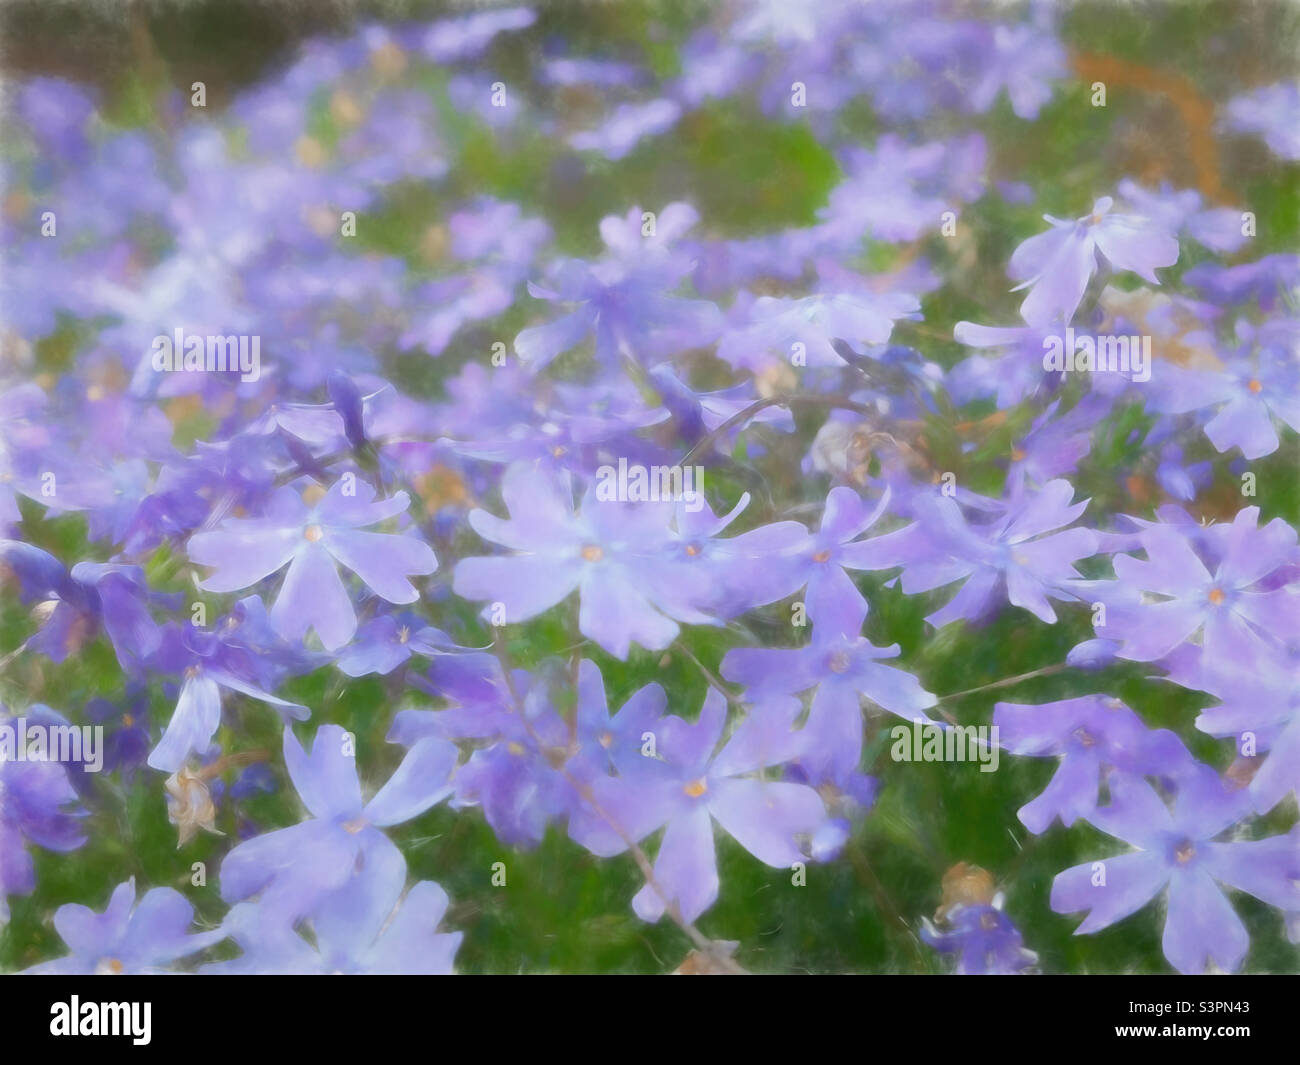 Purple colored phlox flower blossoms. Soft blurry background. Stock Photo